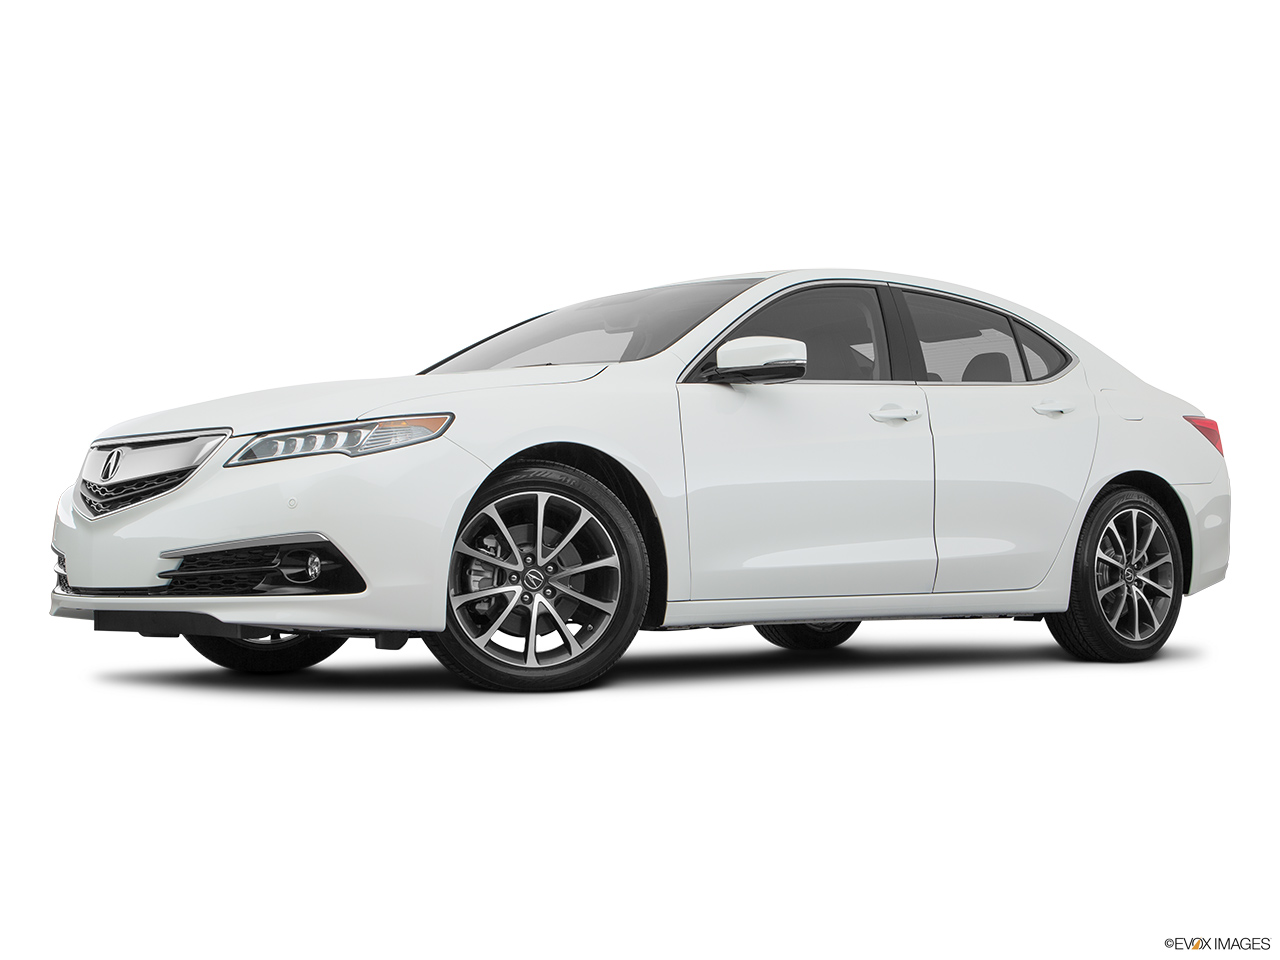 2017 Acura TLX 3.5L Low/wide front 5/8. 